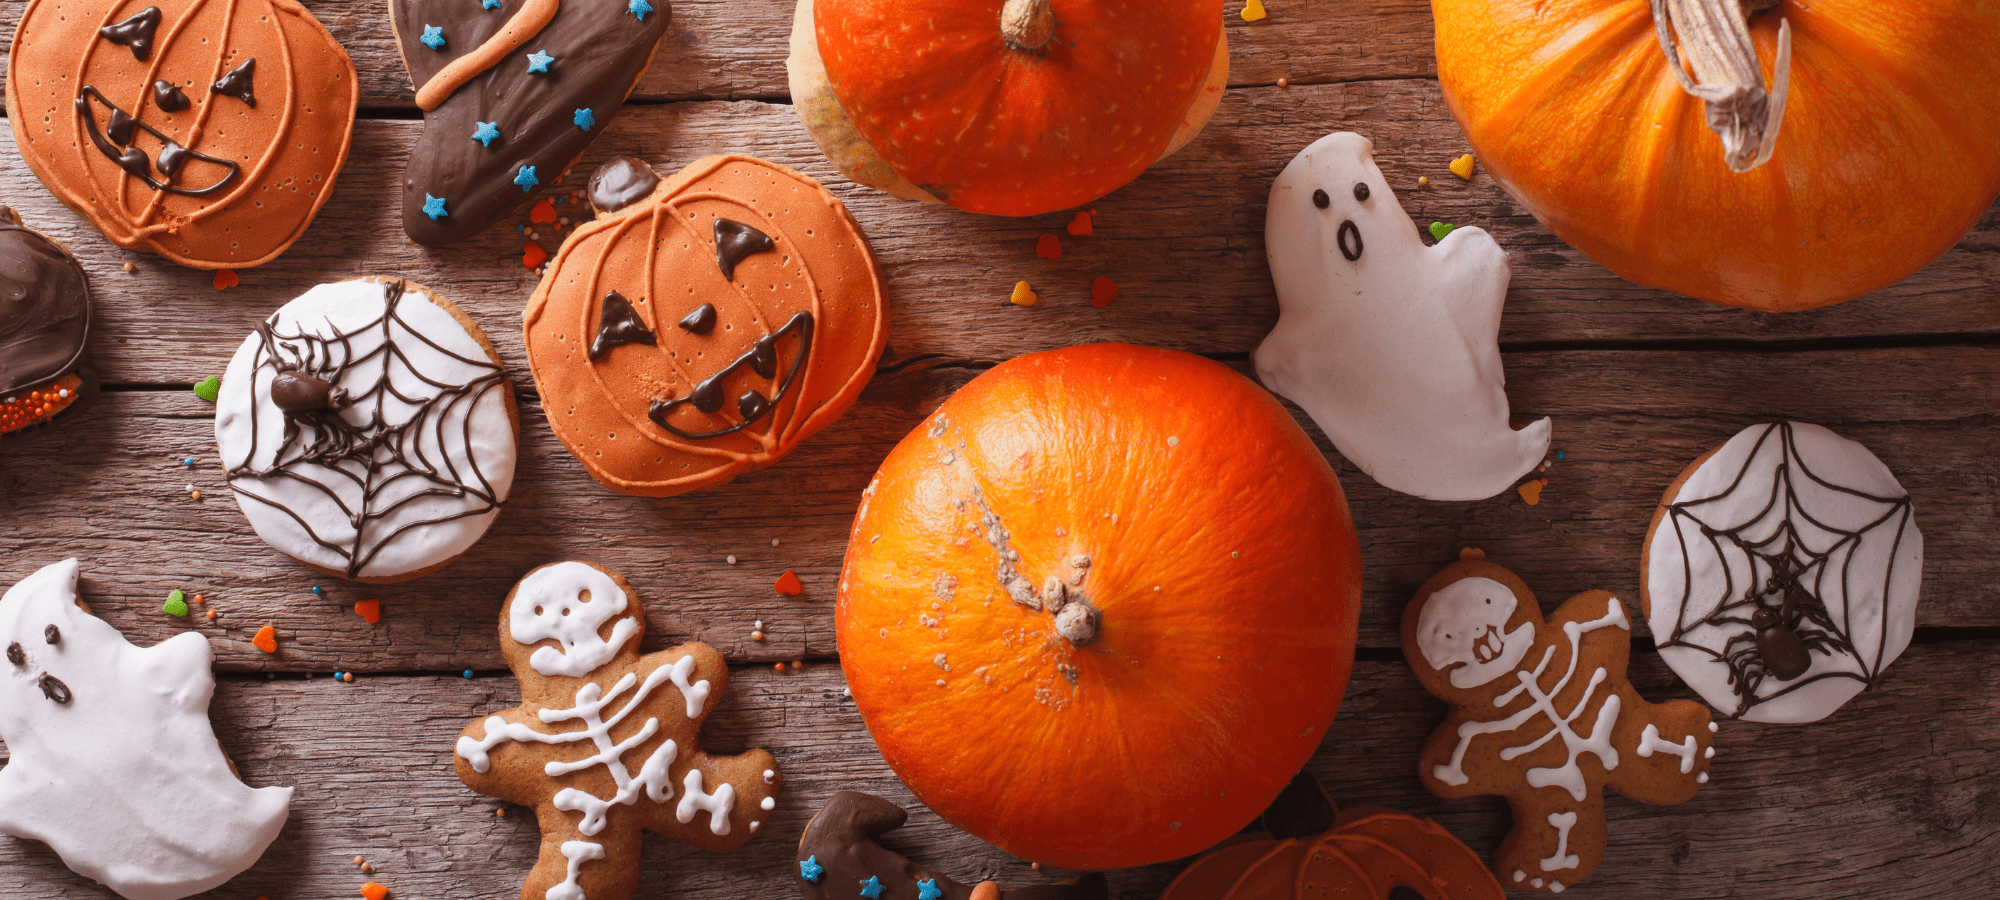 Easy and Delish Halloween Recipes